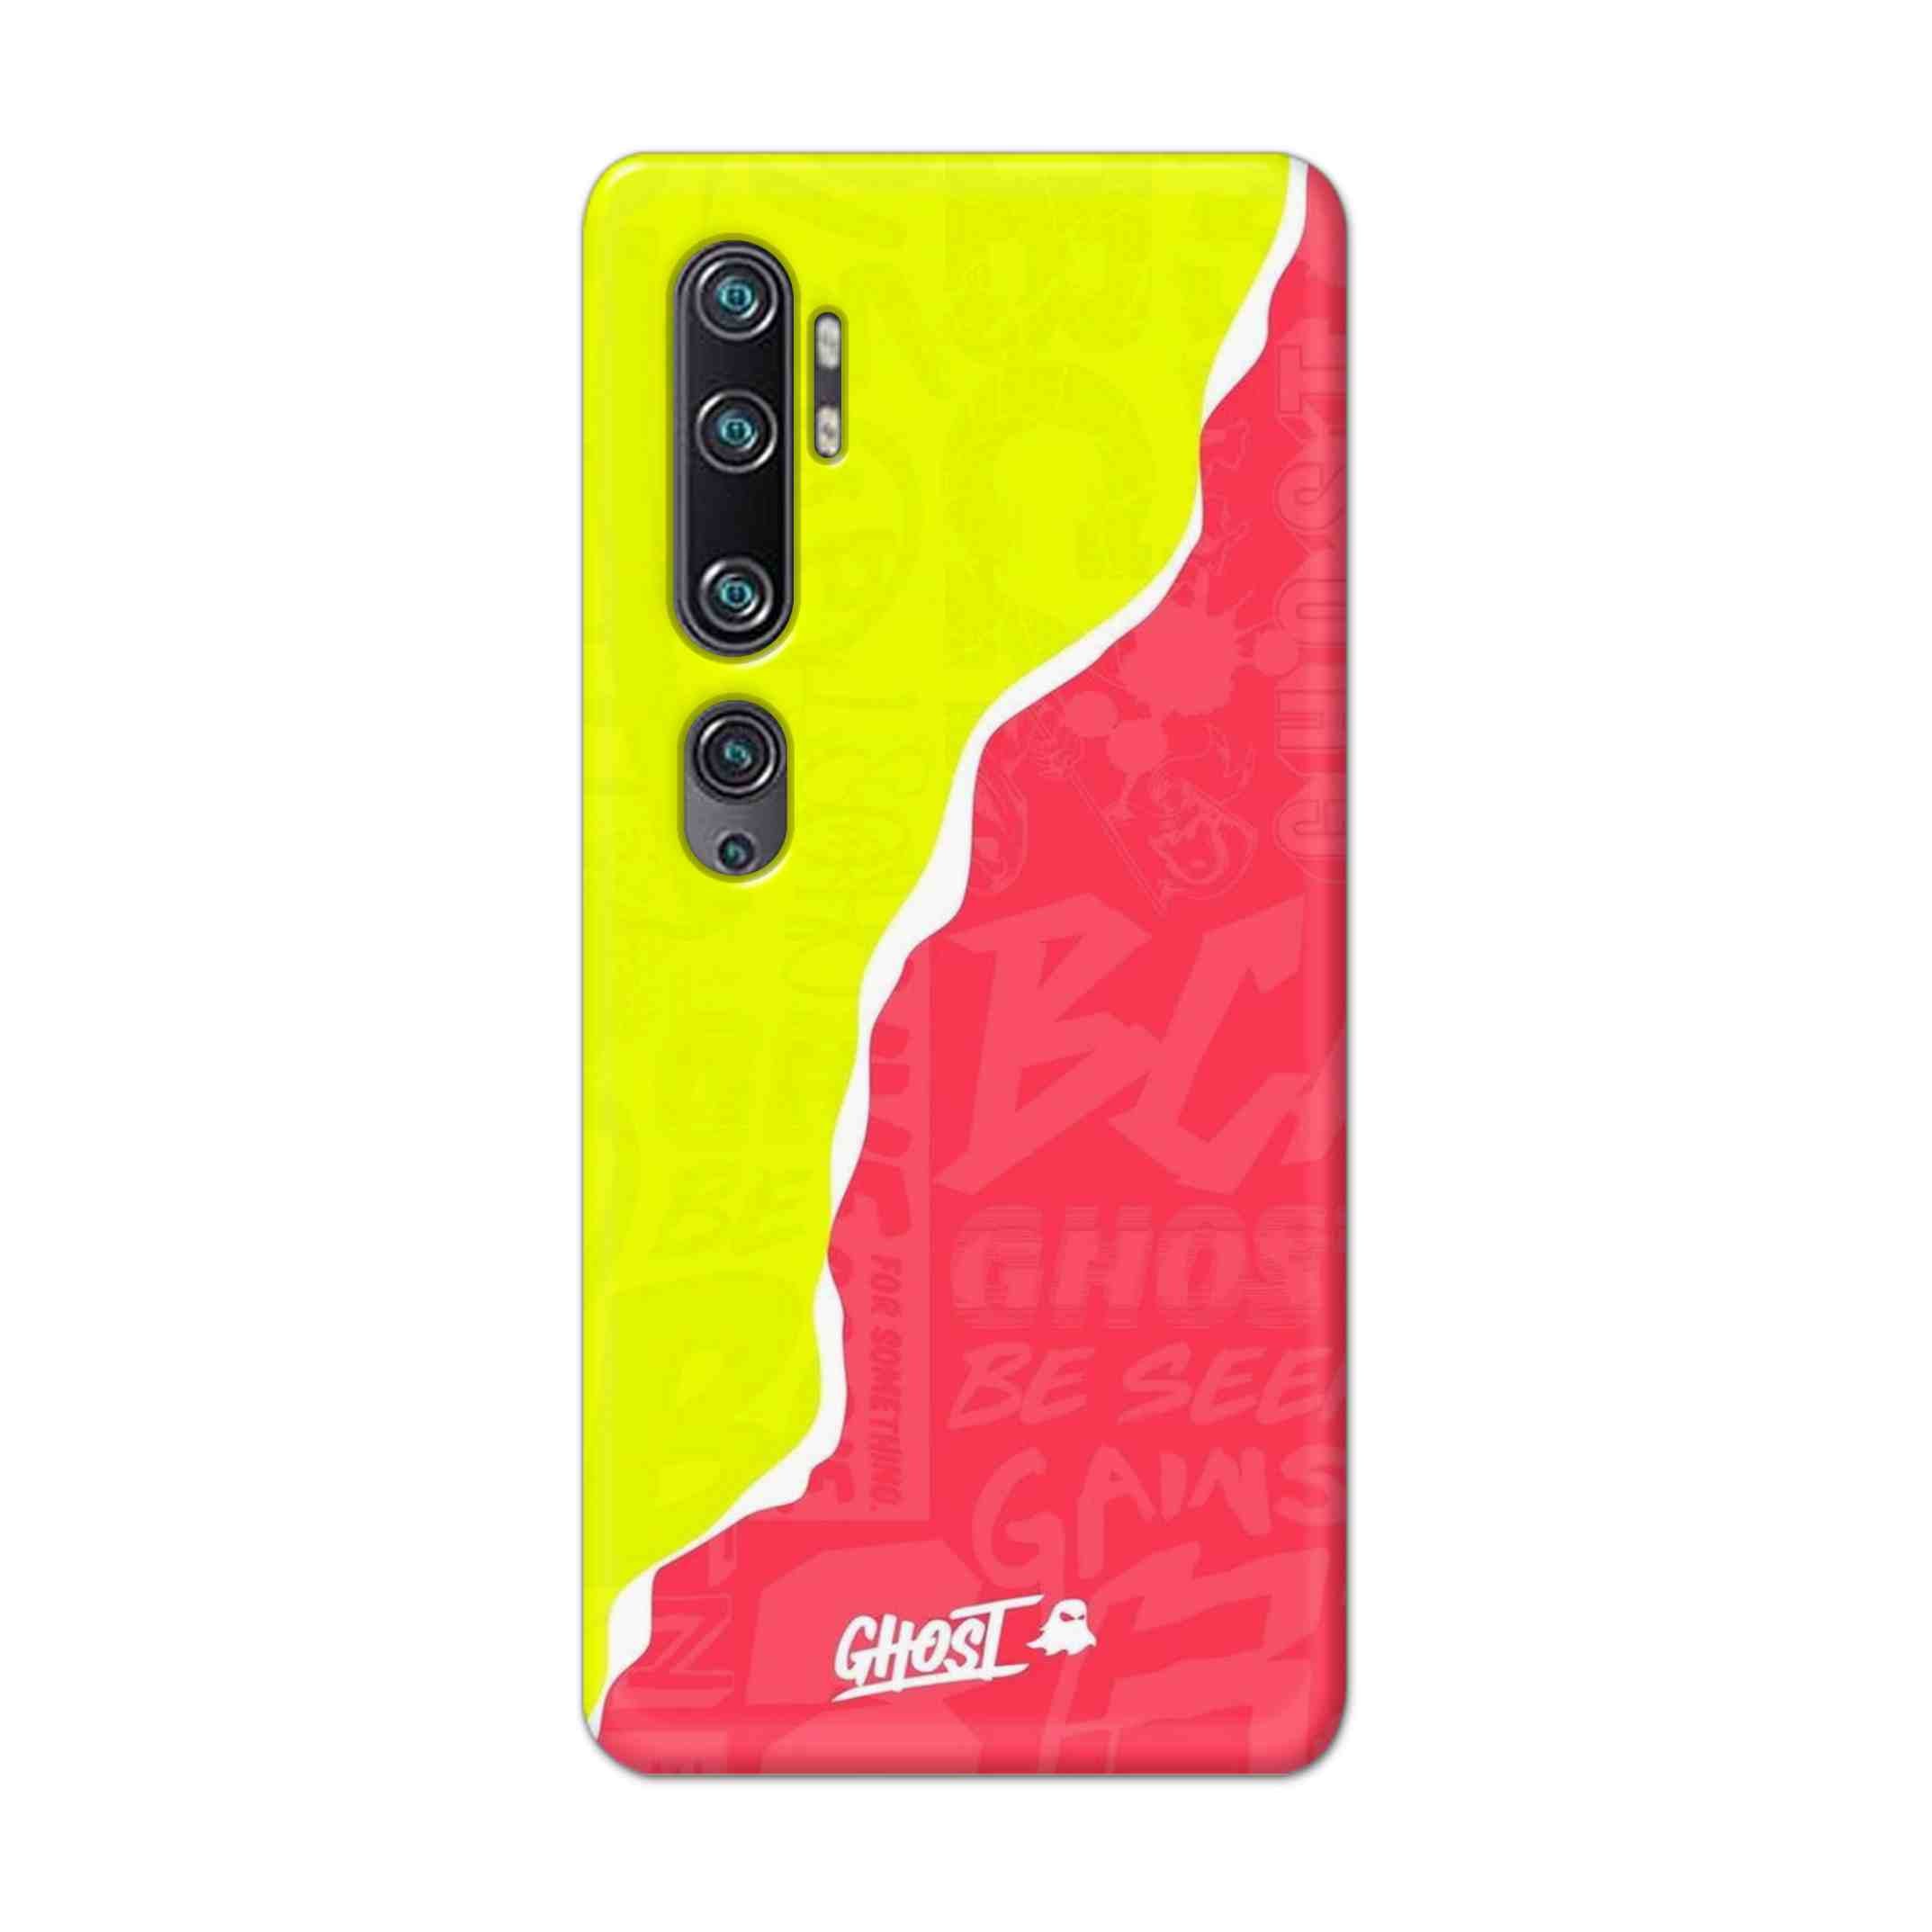 Buy Ghost Hard Back Mobile Phone Case Cover For Xiaomi Mi Note 10 Online